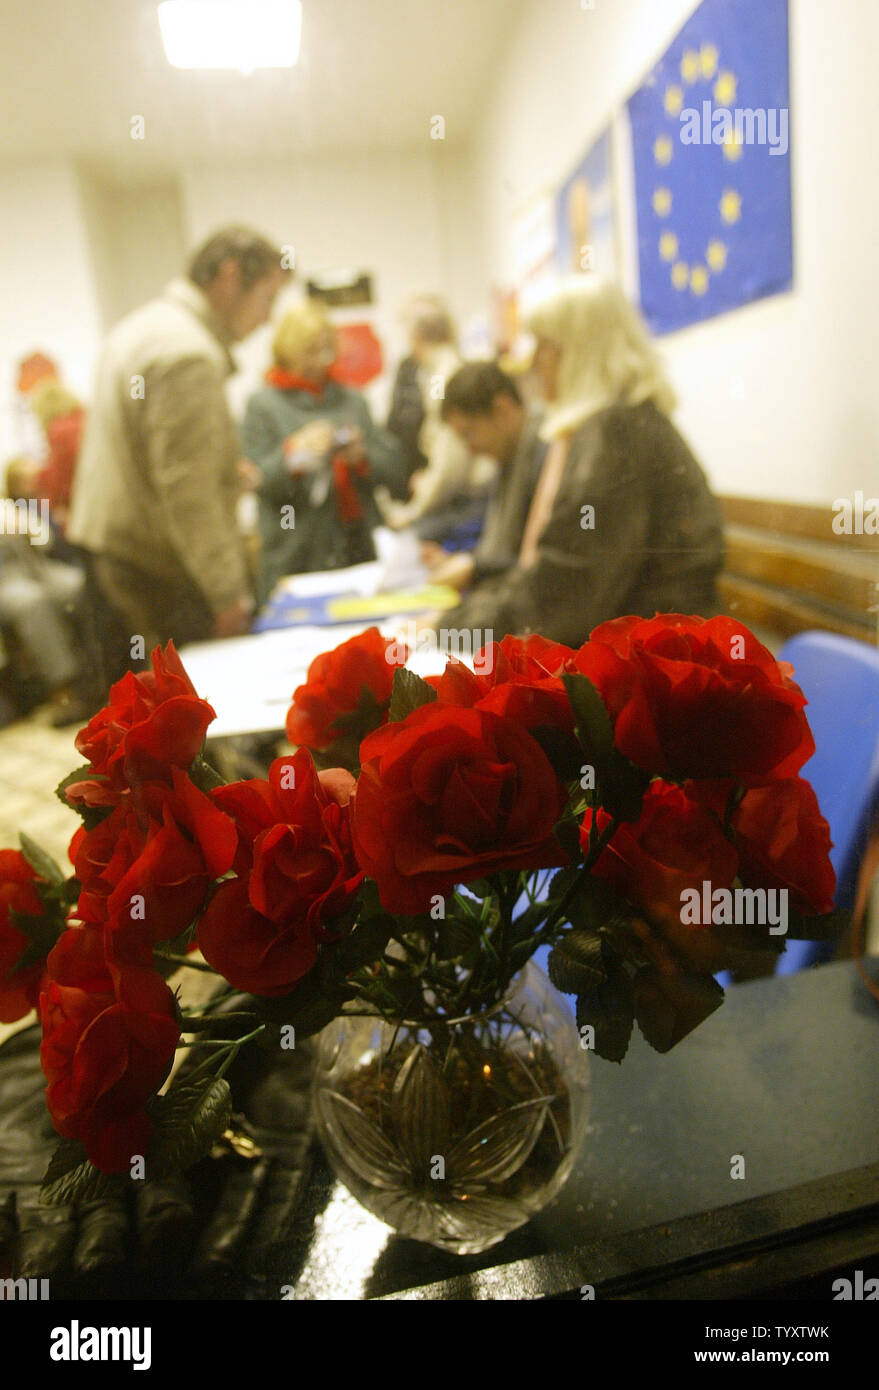 A bouquet of red roses, symbol of the French Socialist Party sits at a window as party members line up to vote during the party's primary for the next French presidential election in Paris, November 16, 2006. Three candidates, Segolene Royal, Dominique Strauss-Khan and Laurent Fabius, are vying to lead the Socialist Party into next year's French presidential election.(UPI Photo/Eco Clement) Stock Photo